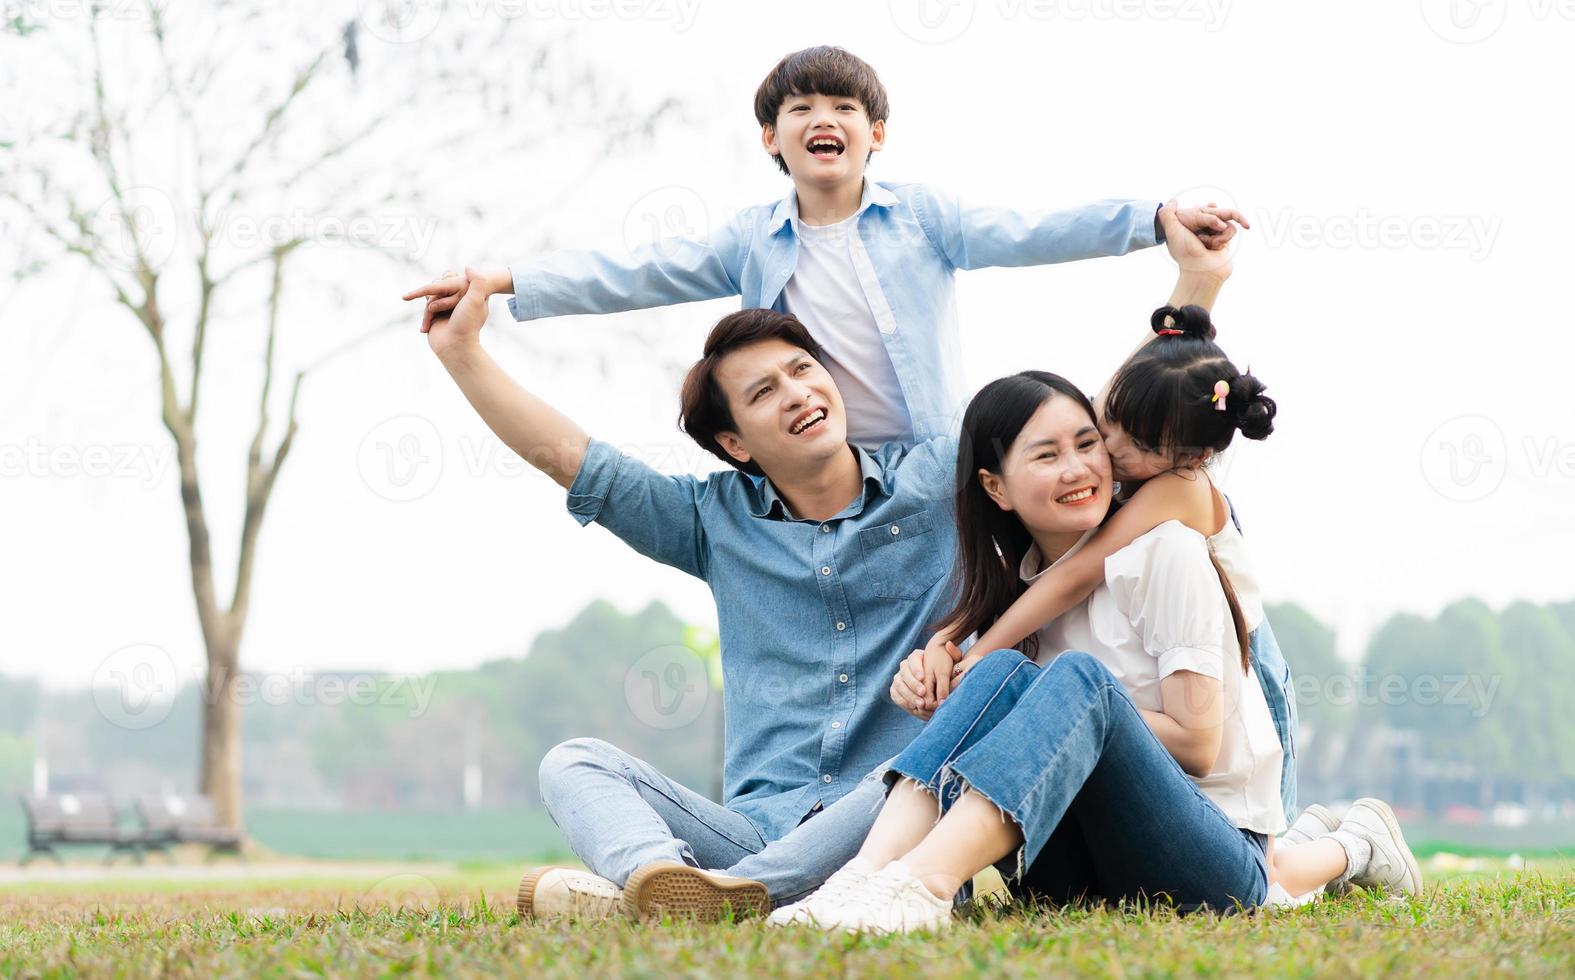 image of an asian family sitting together on the grass at the park photo